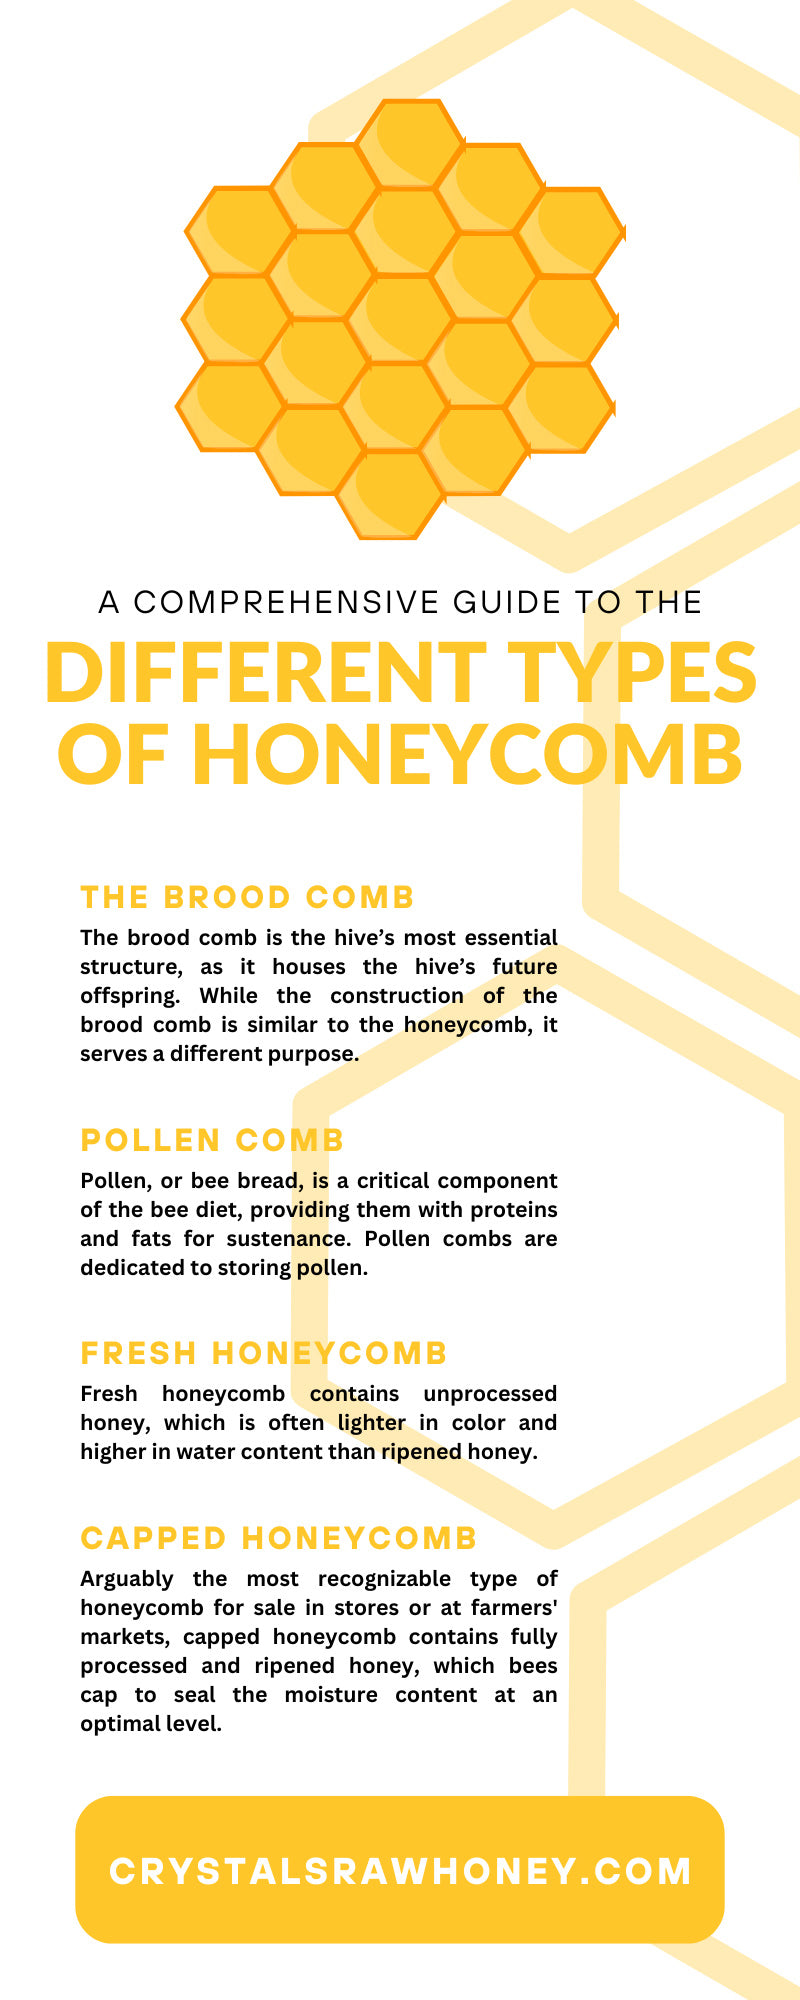 A Comprehensive Guide to the Different Types of Honeycomb